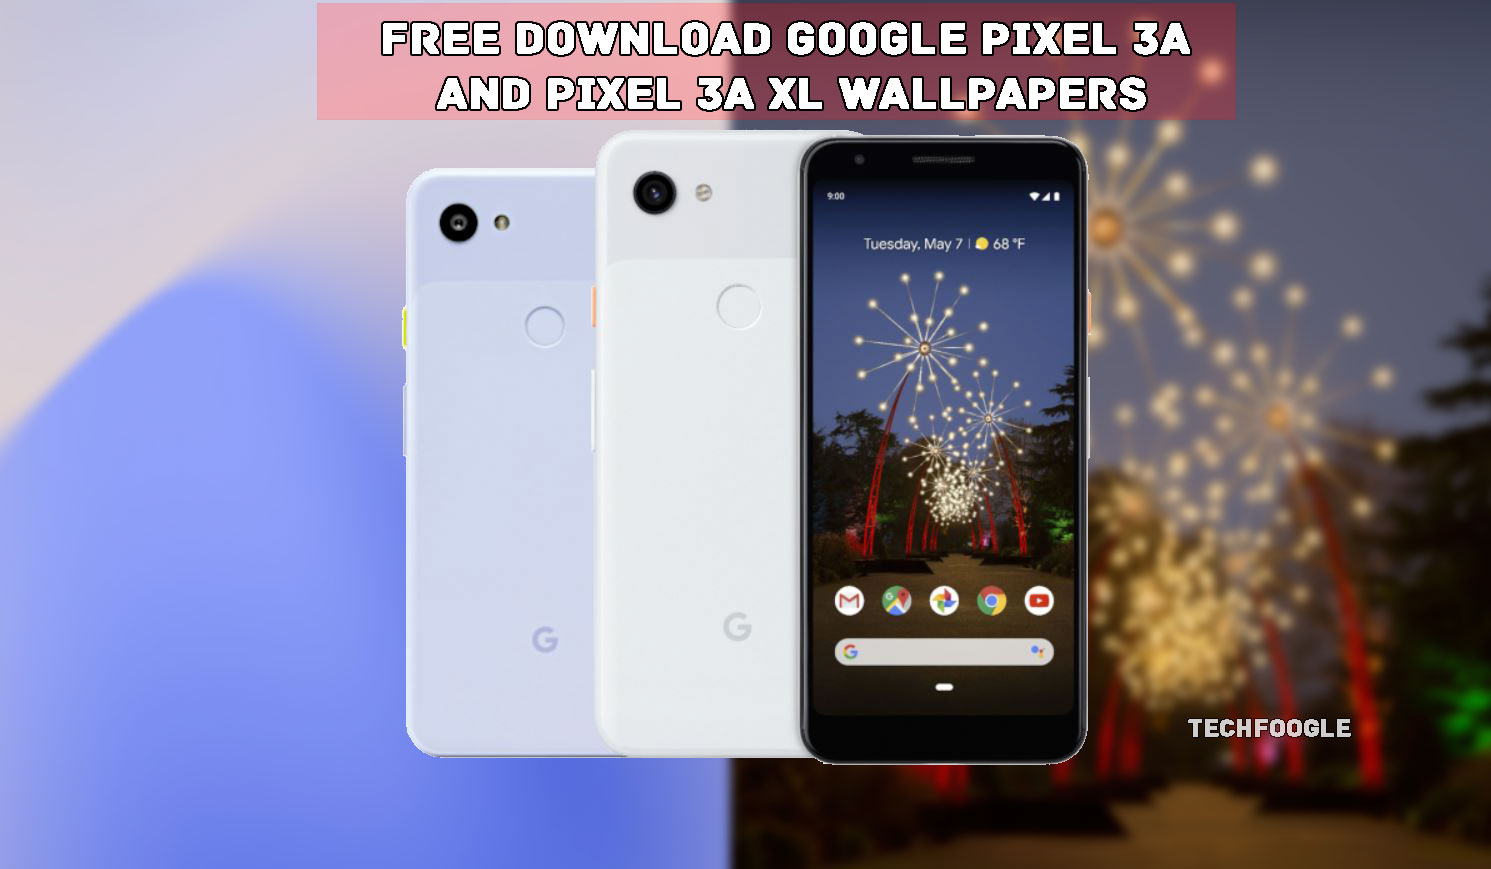 Download Google Pixel 3A and Pixel 3A XL Wallpapers